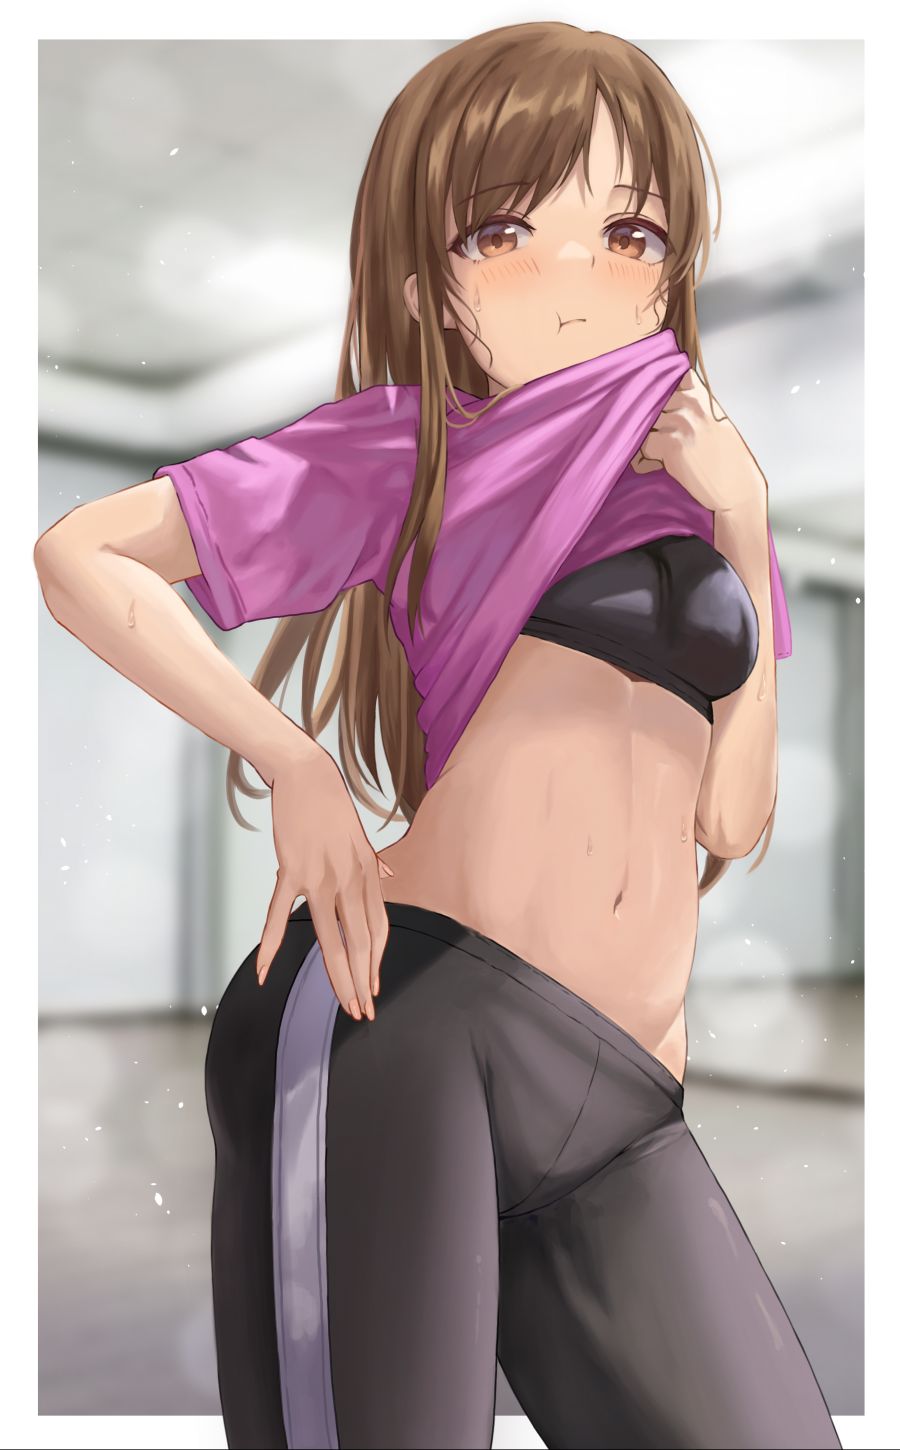 __nitta_minami_idolmaster_and_1_more_drawn_by_yj__95465ff36f4960a08a24a9129841abac.png